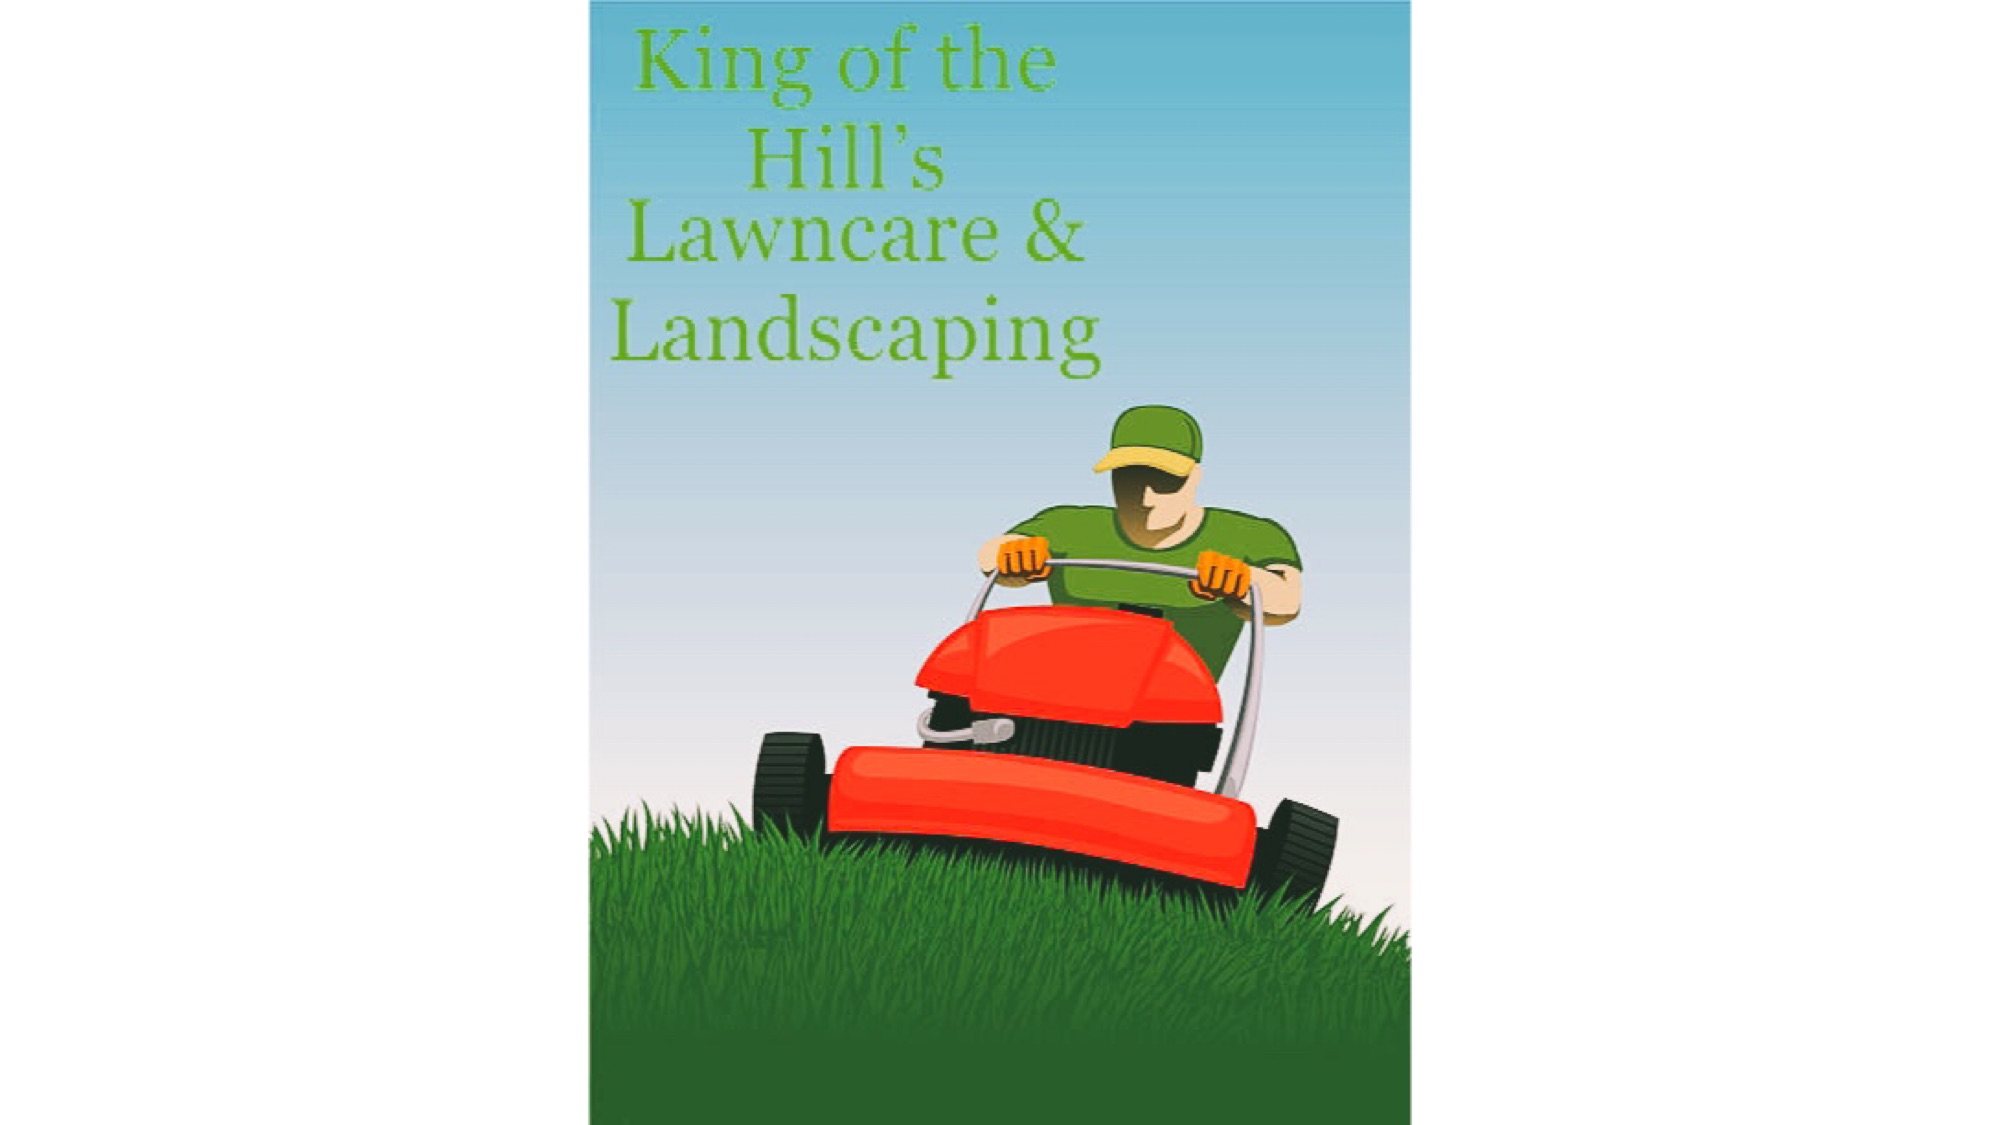 King of the Hills Lawn Care & Landscaping Services Logo